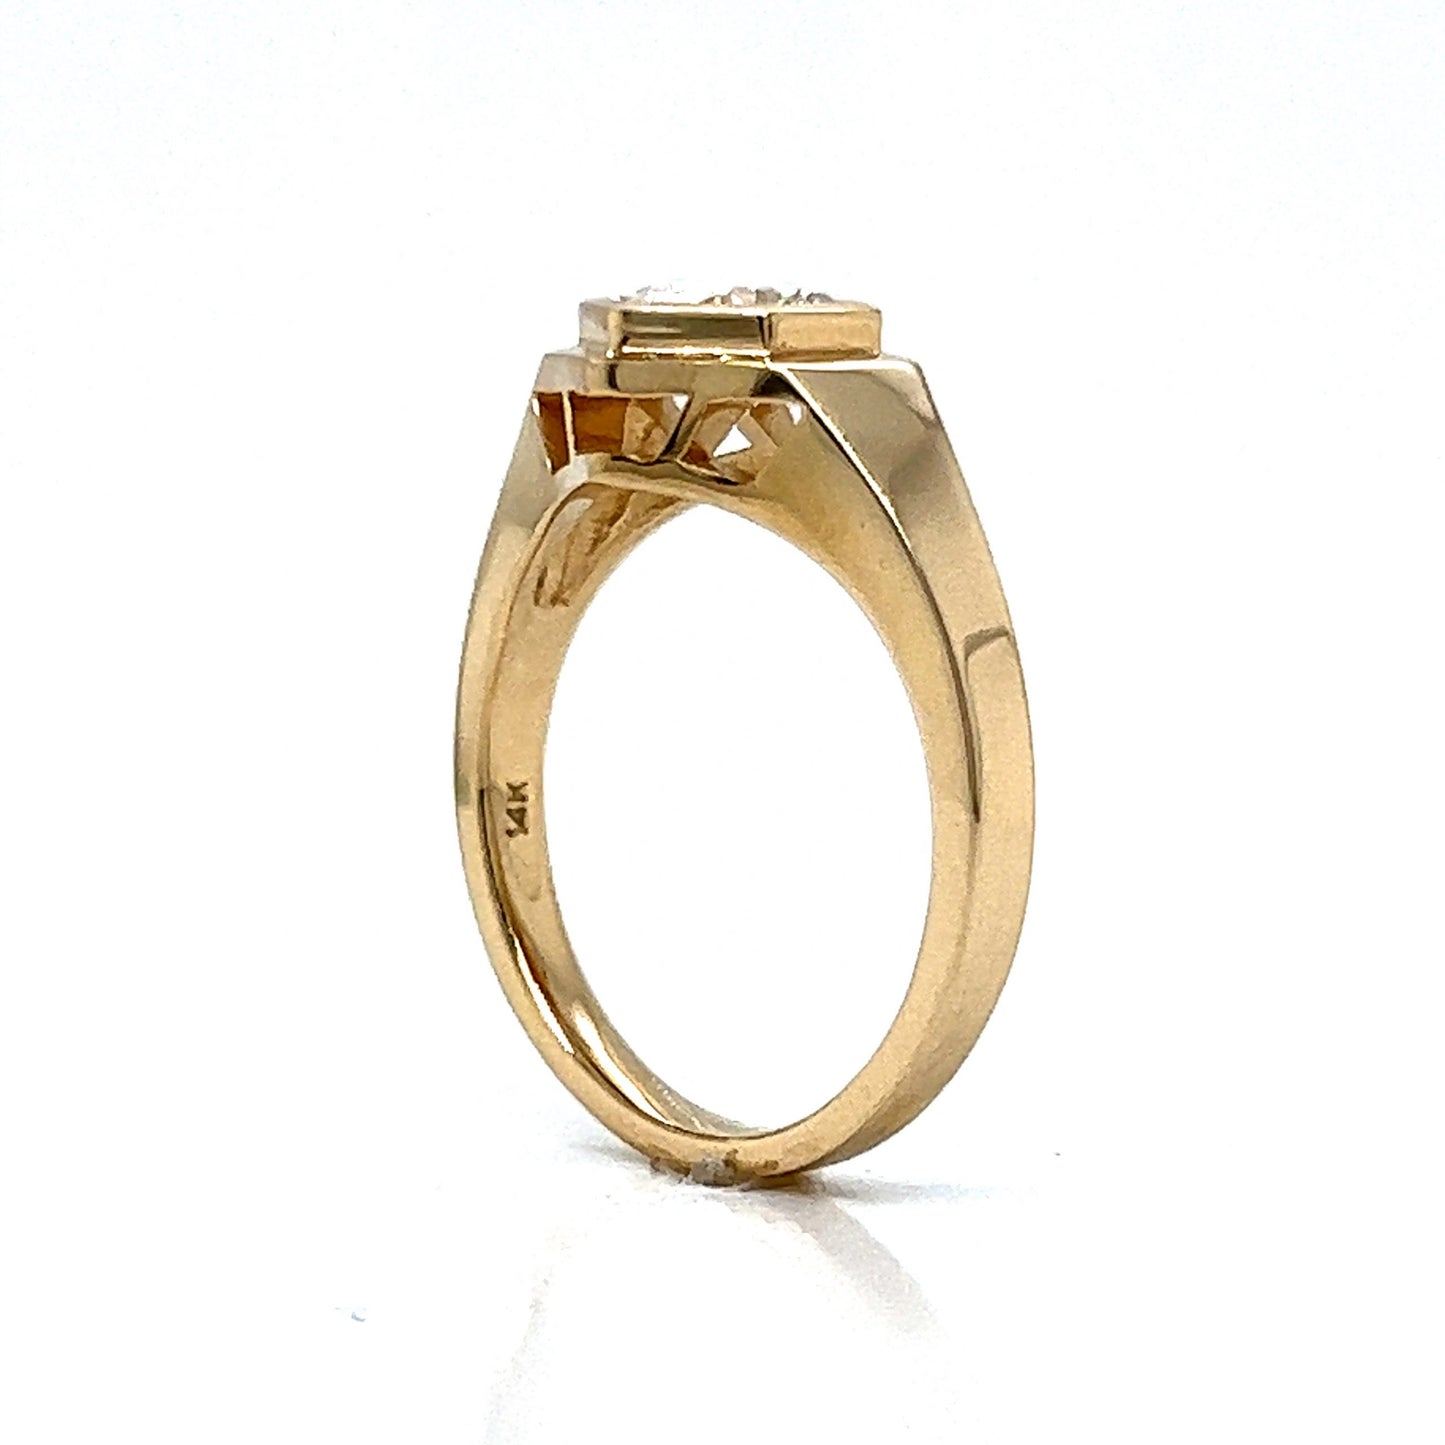 Hexagon Shaped .84 Round Diamond Engagement Ring in 14k Gold